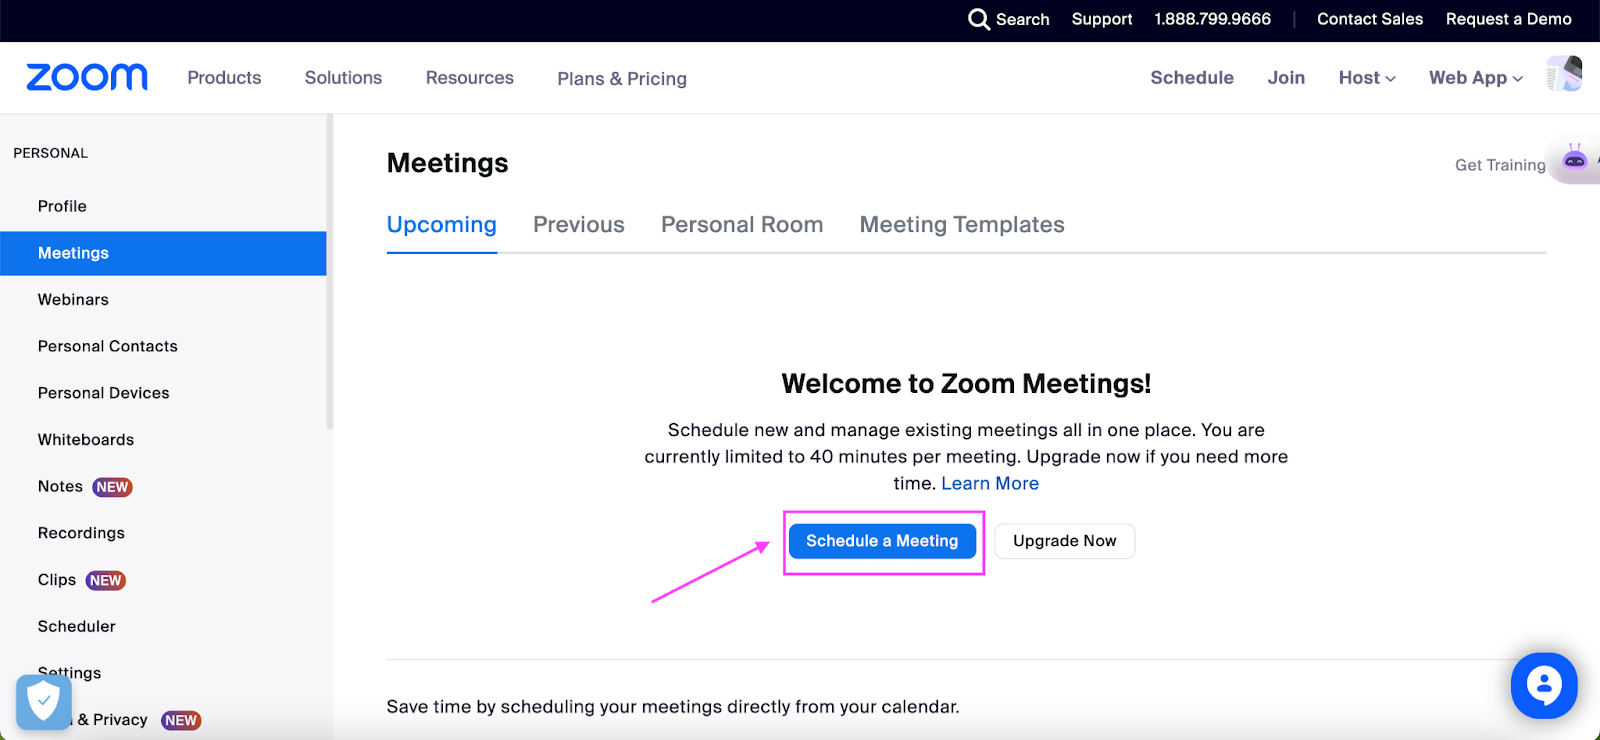 Zoom waiting room - How to enable Zoom Waiting Room for a single meeting